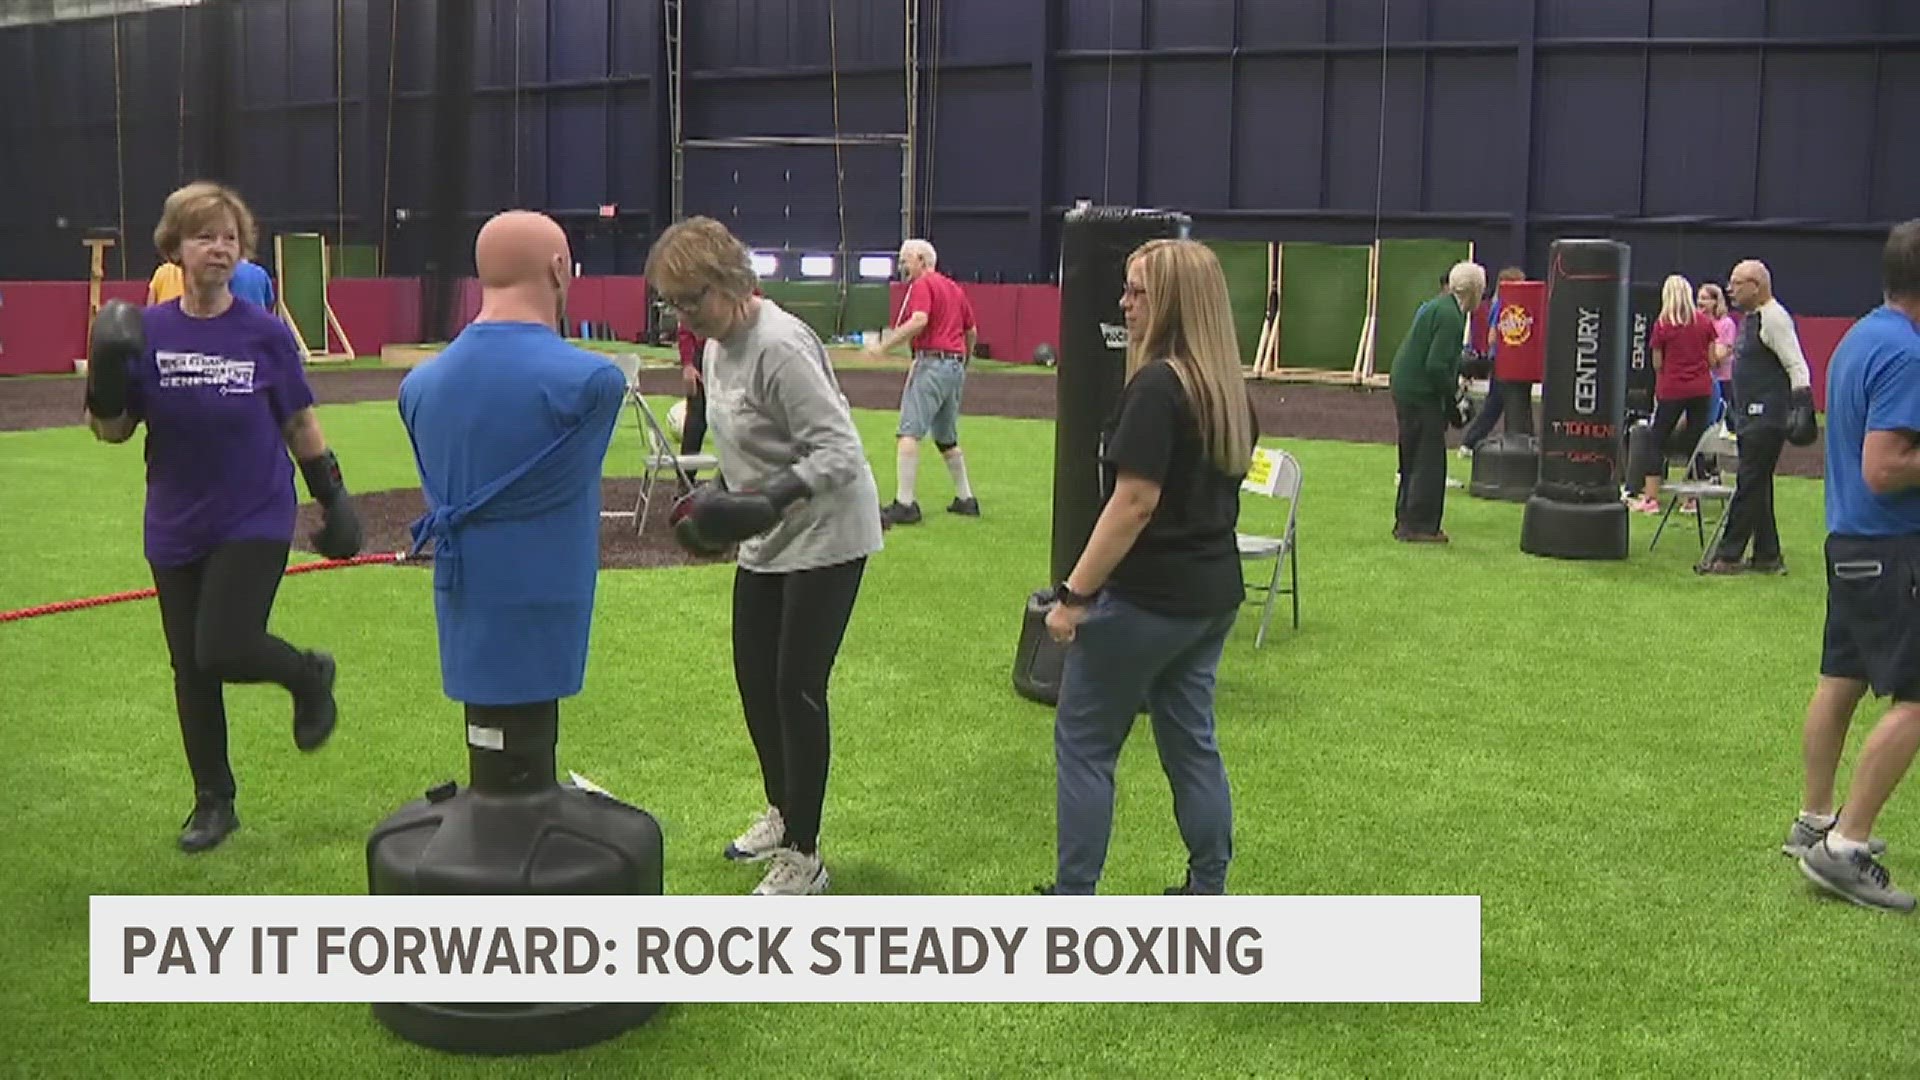 The Rock Steady Boxing Program is an exercise course geared towards patients with Parkinson's. By training on agility and balance, it offsets Parkinson's symptoms.